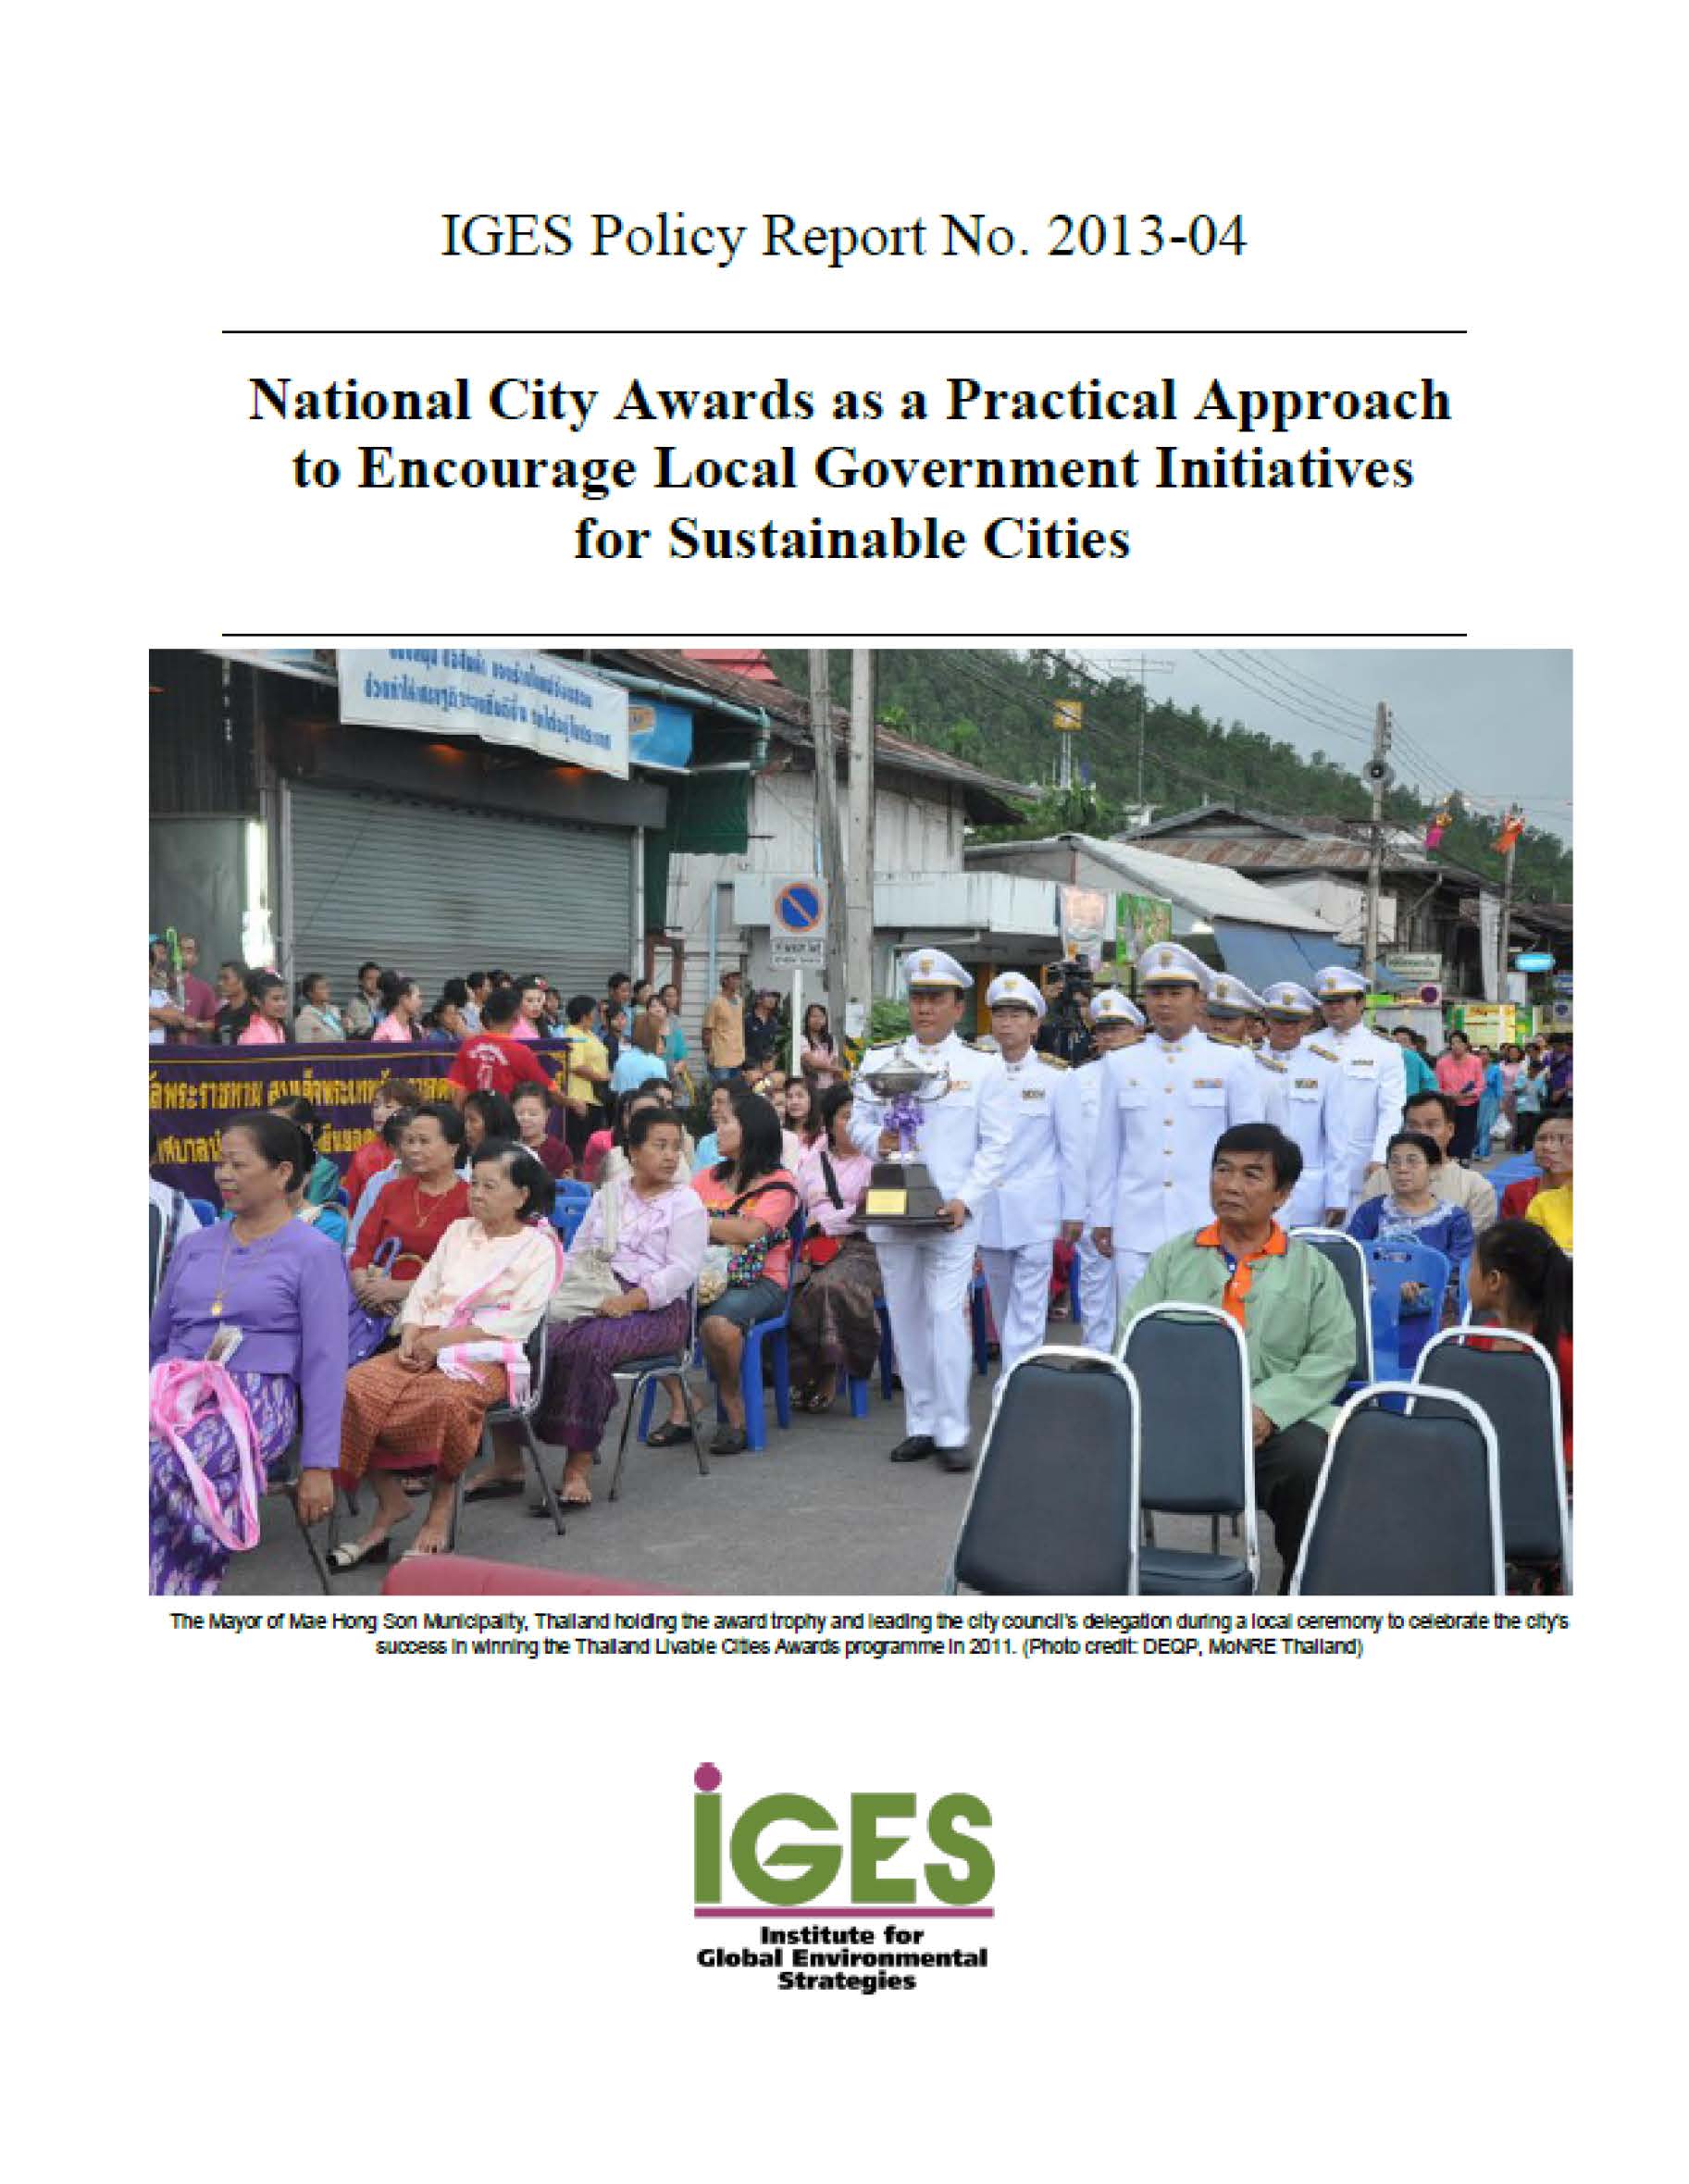 National City Awards as a Practical Approach to Encourage Local Government Initiatives for Sustainable Cities